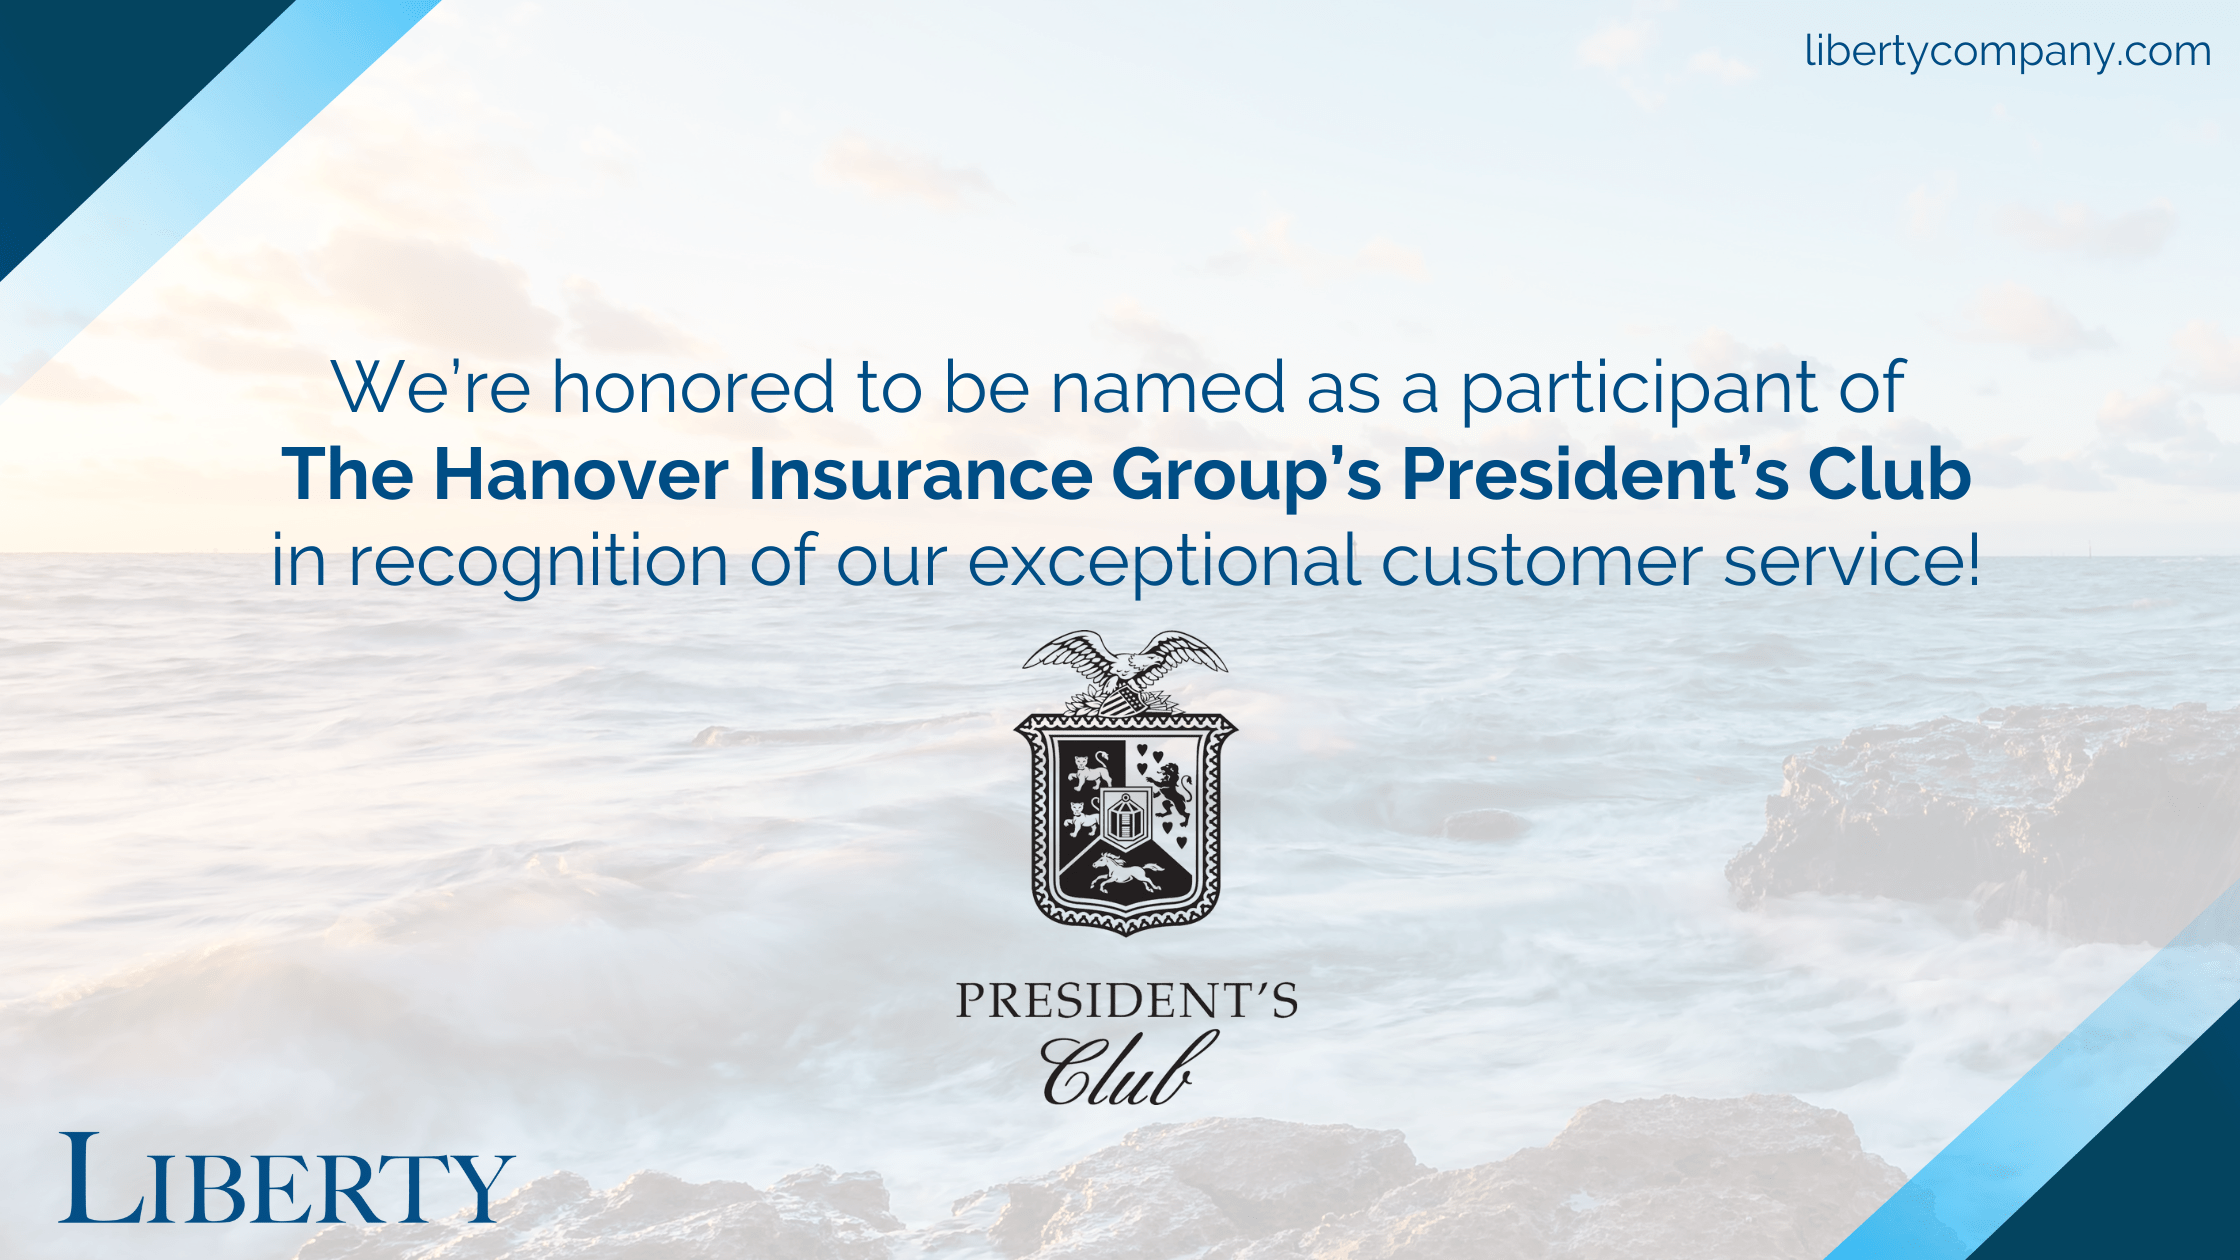 The Liberty Company Insurance Brokers Selected for The Hanover’s President’s Club